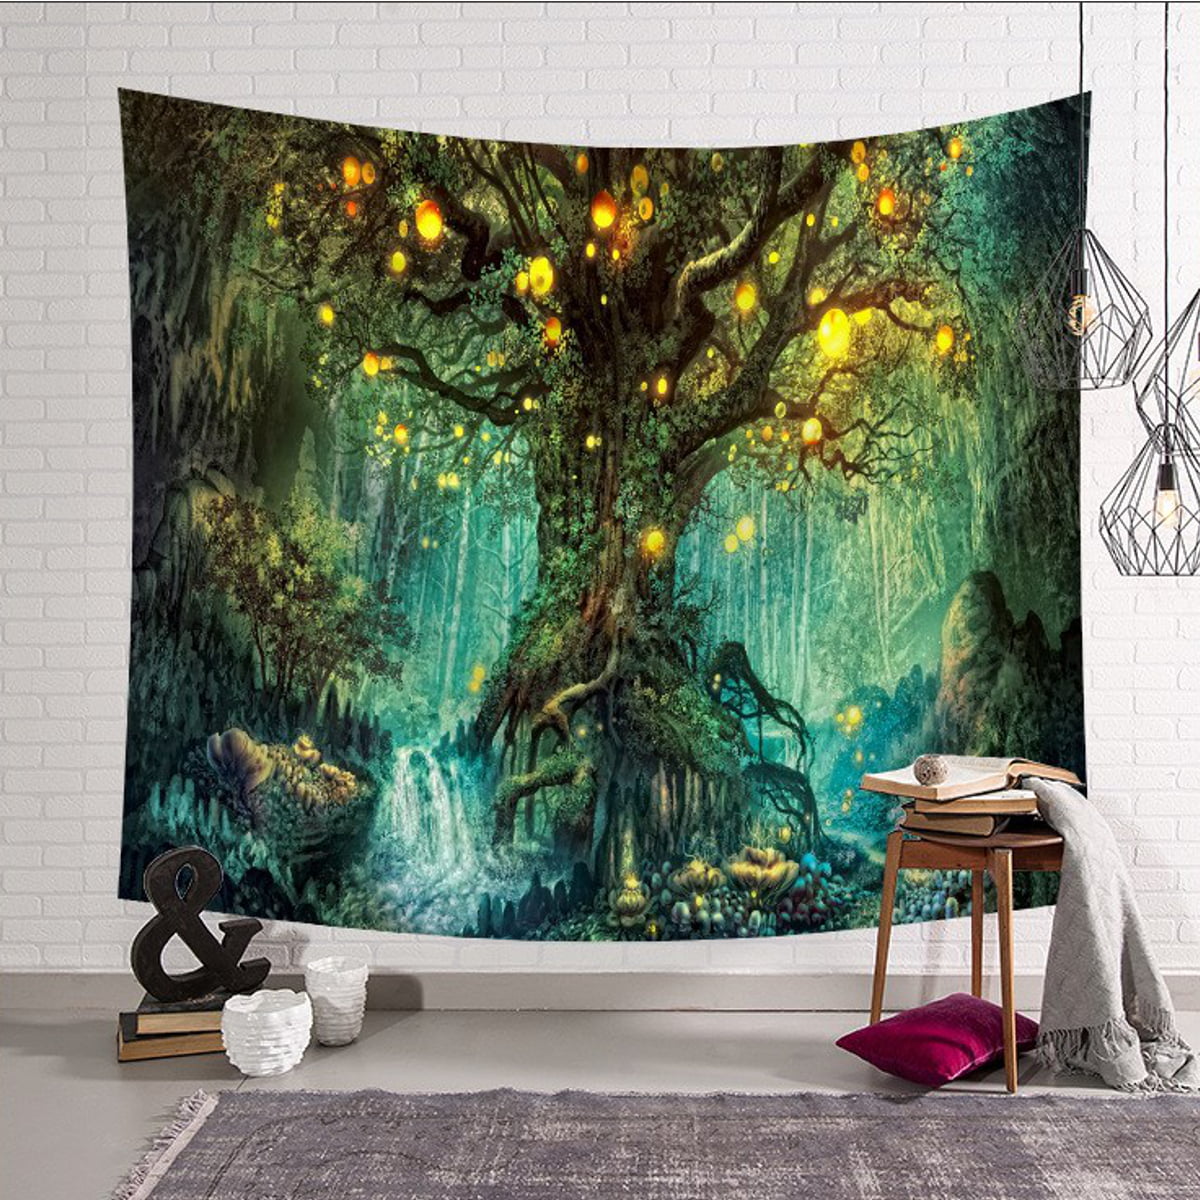 Cat Printed Large Wall Tapestry Wall Hanging Wall Art Decor For Home